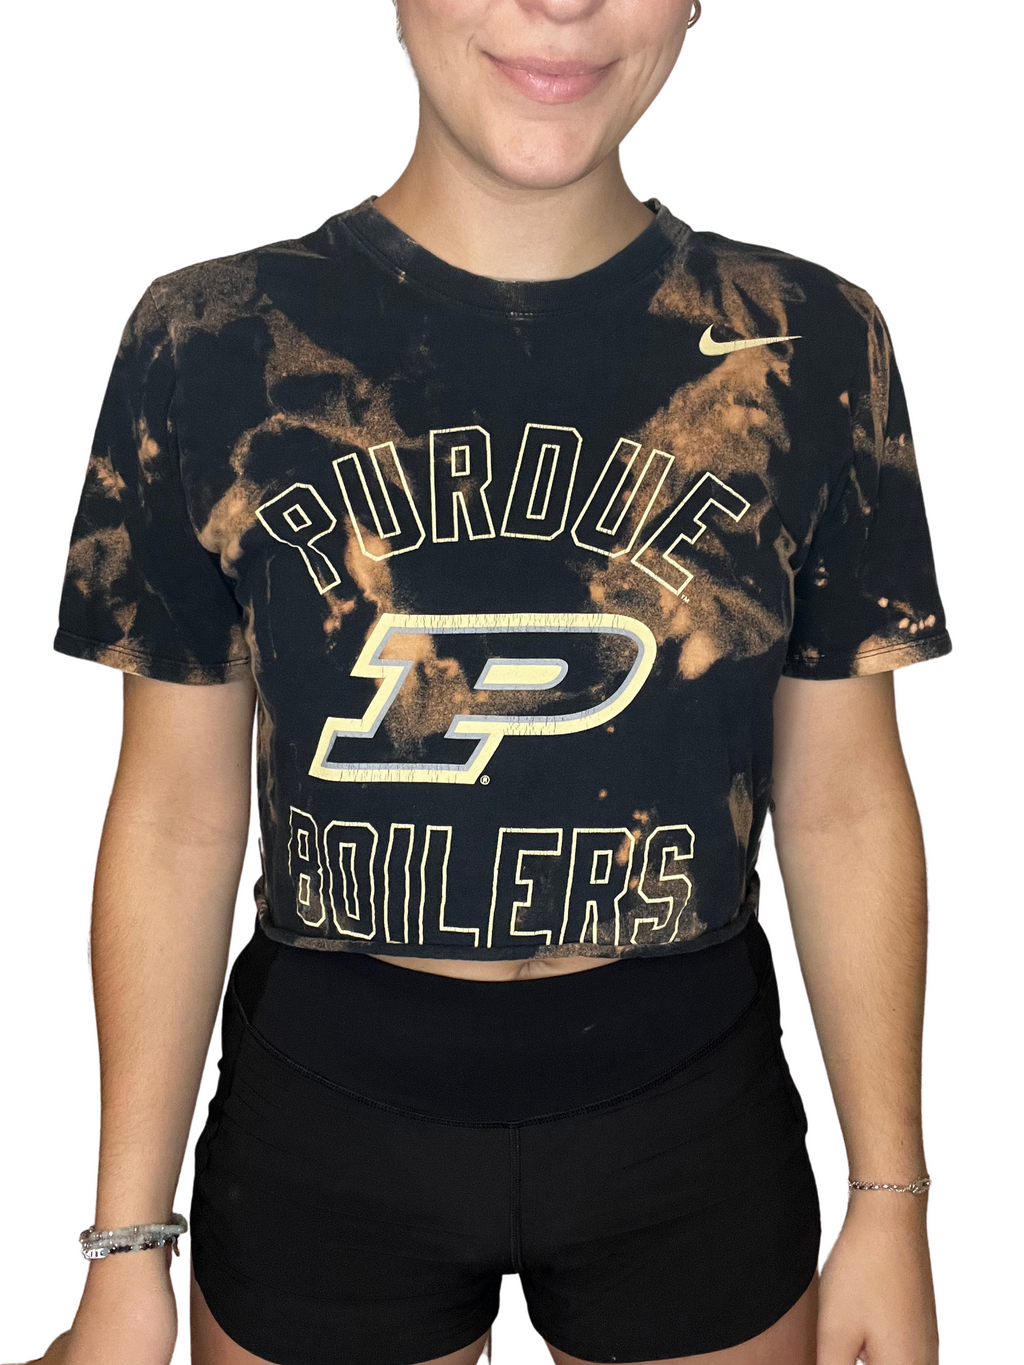 Purdue University Bleached & Cropped Shirt